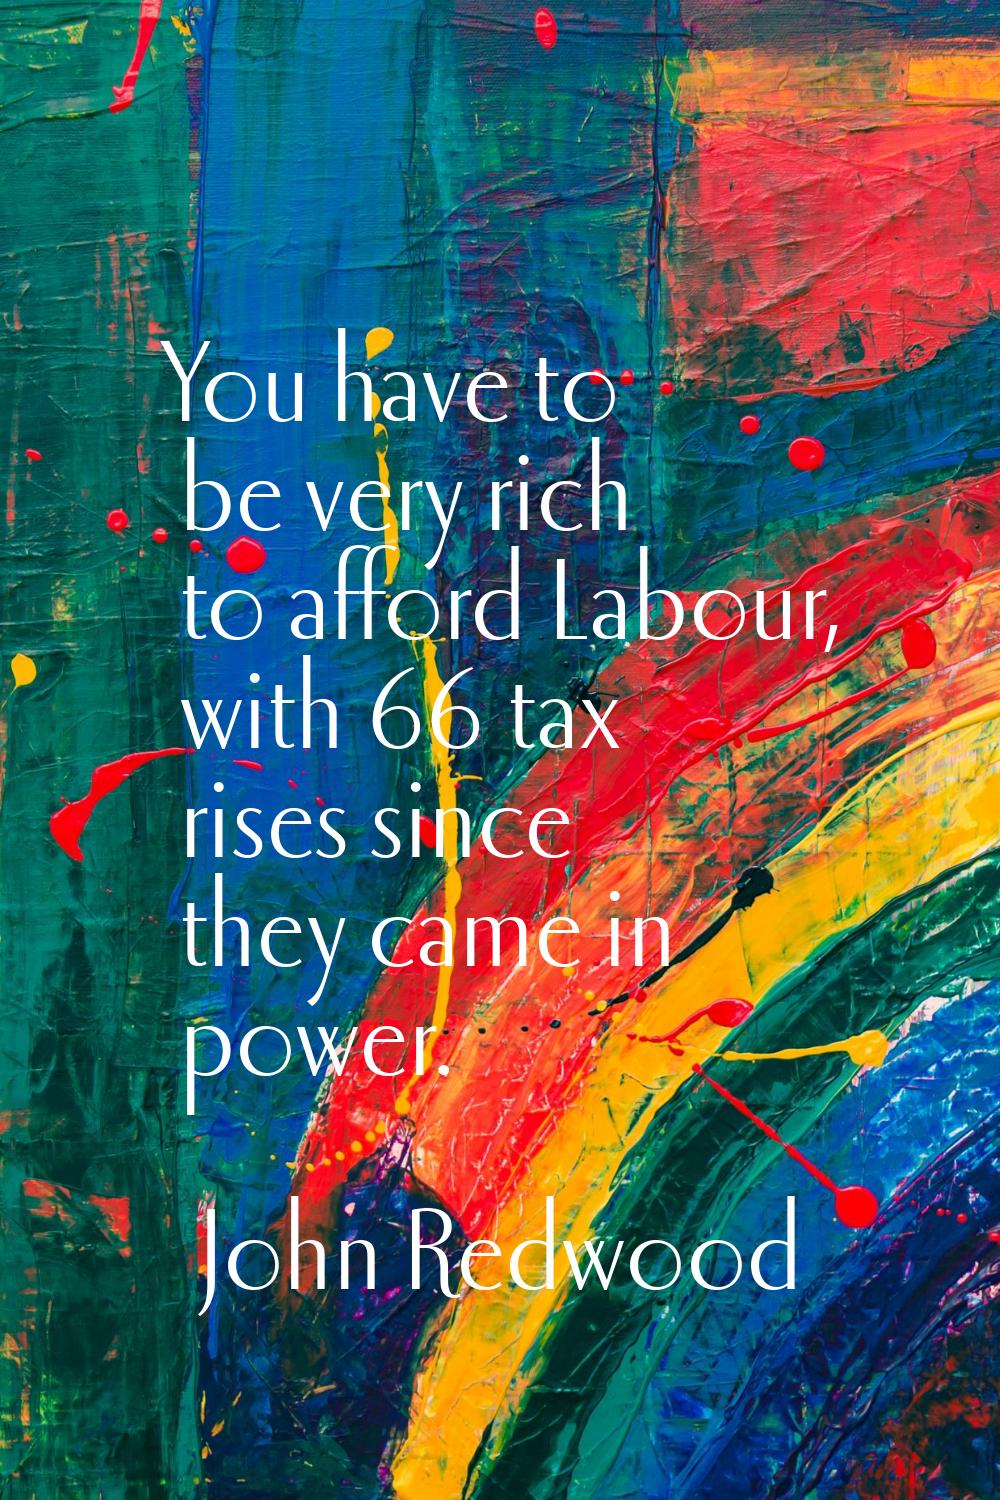 You have to be very rich to afford Labour, with 66 tax rises since they came in power.